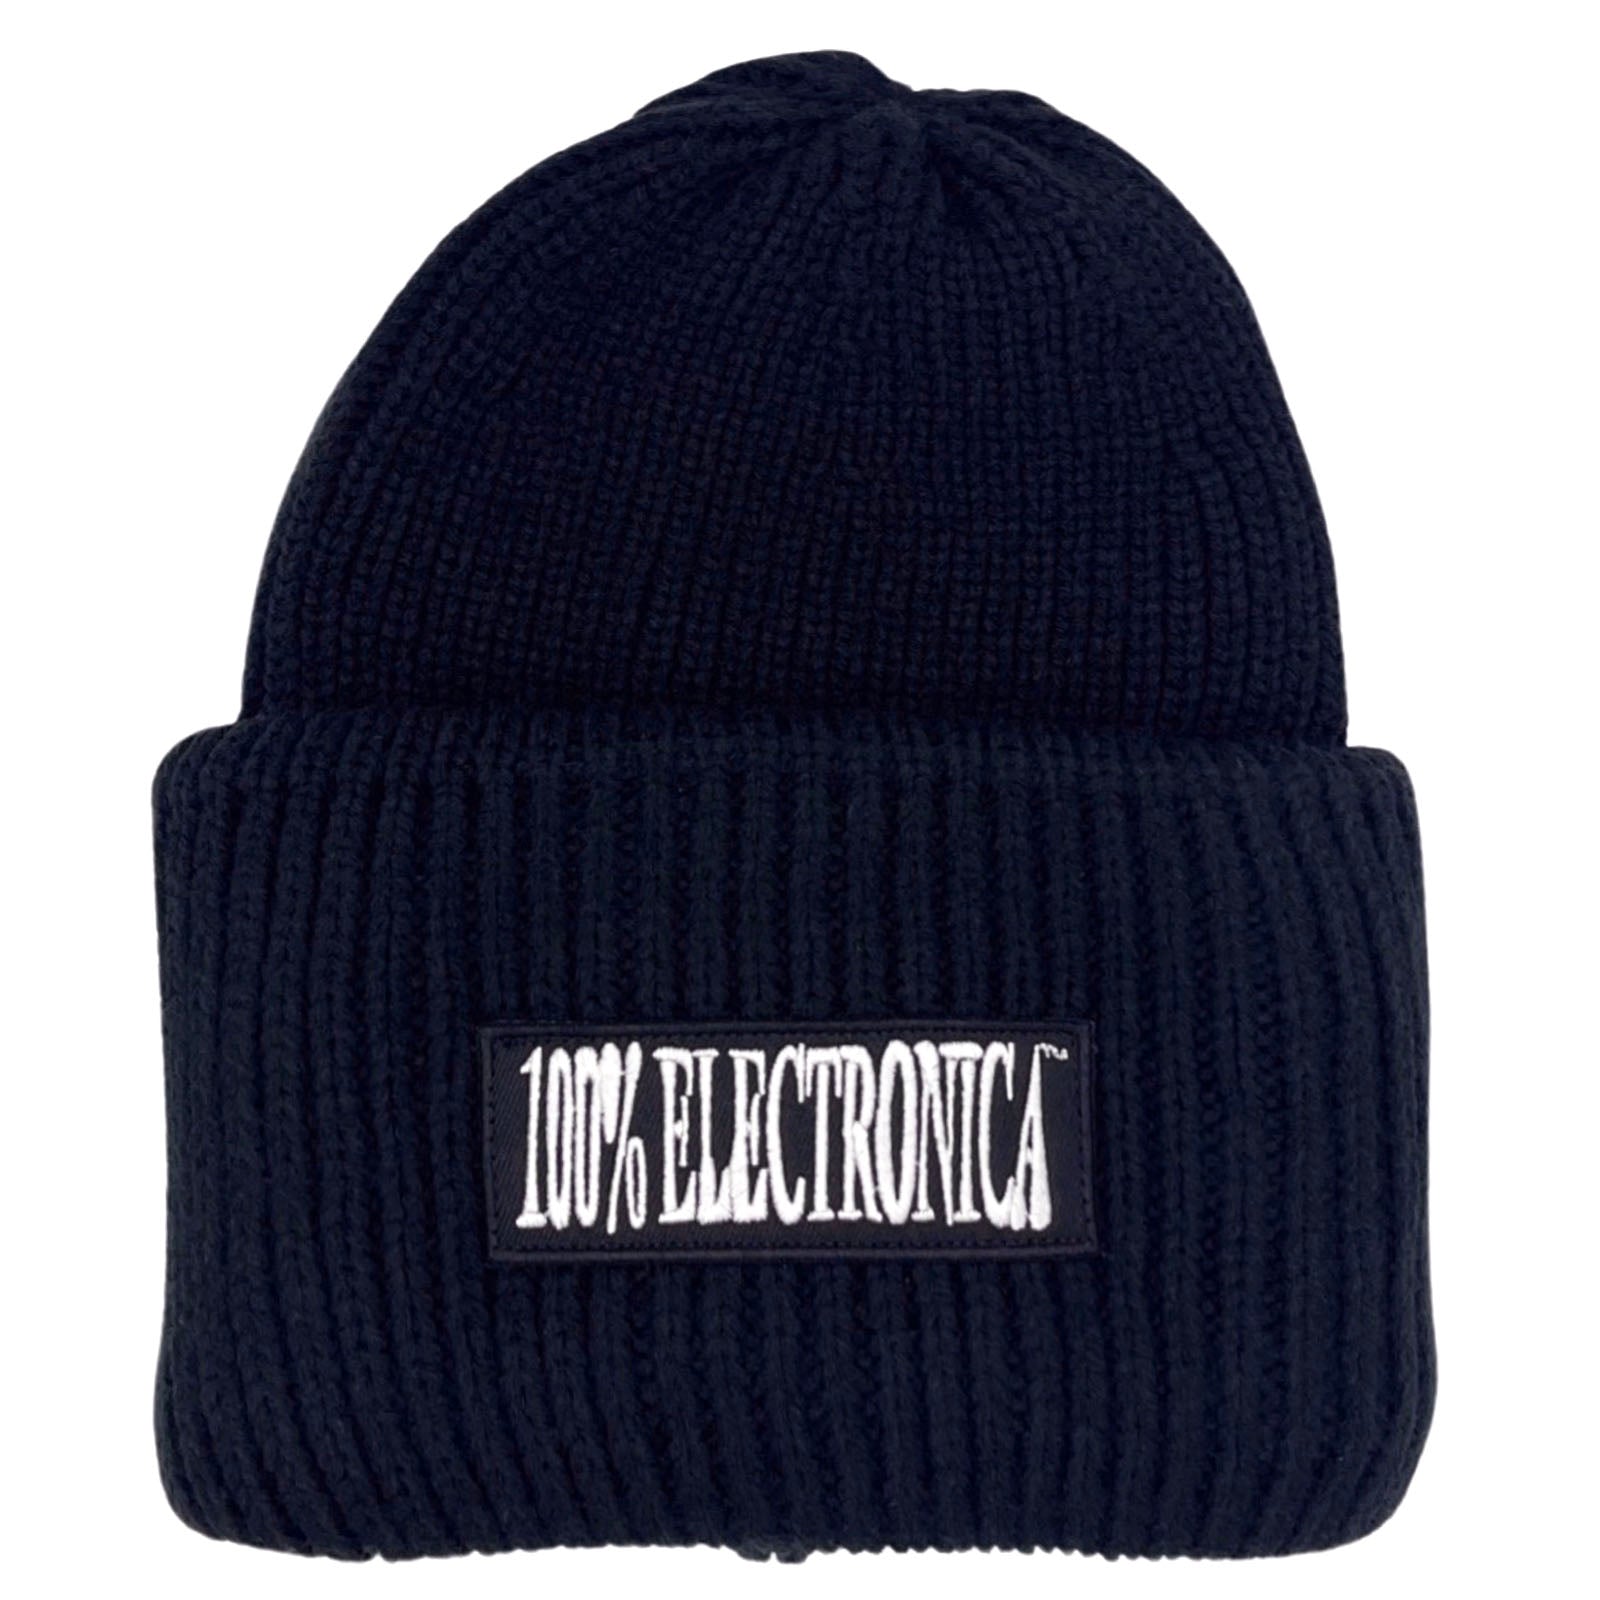 100% Electronica - Logo BIG Beanie (Black) - 100% Electronica Official Store (Photo 1)